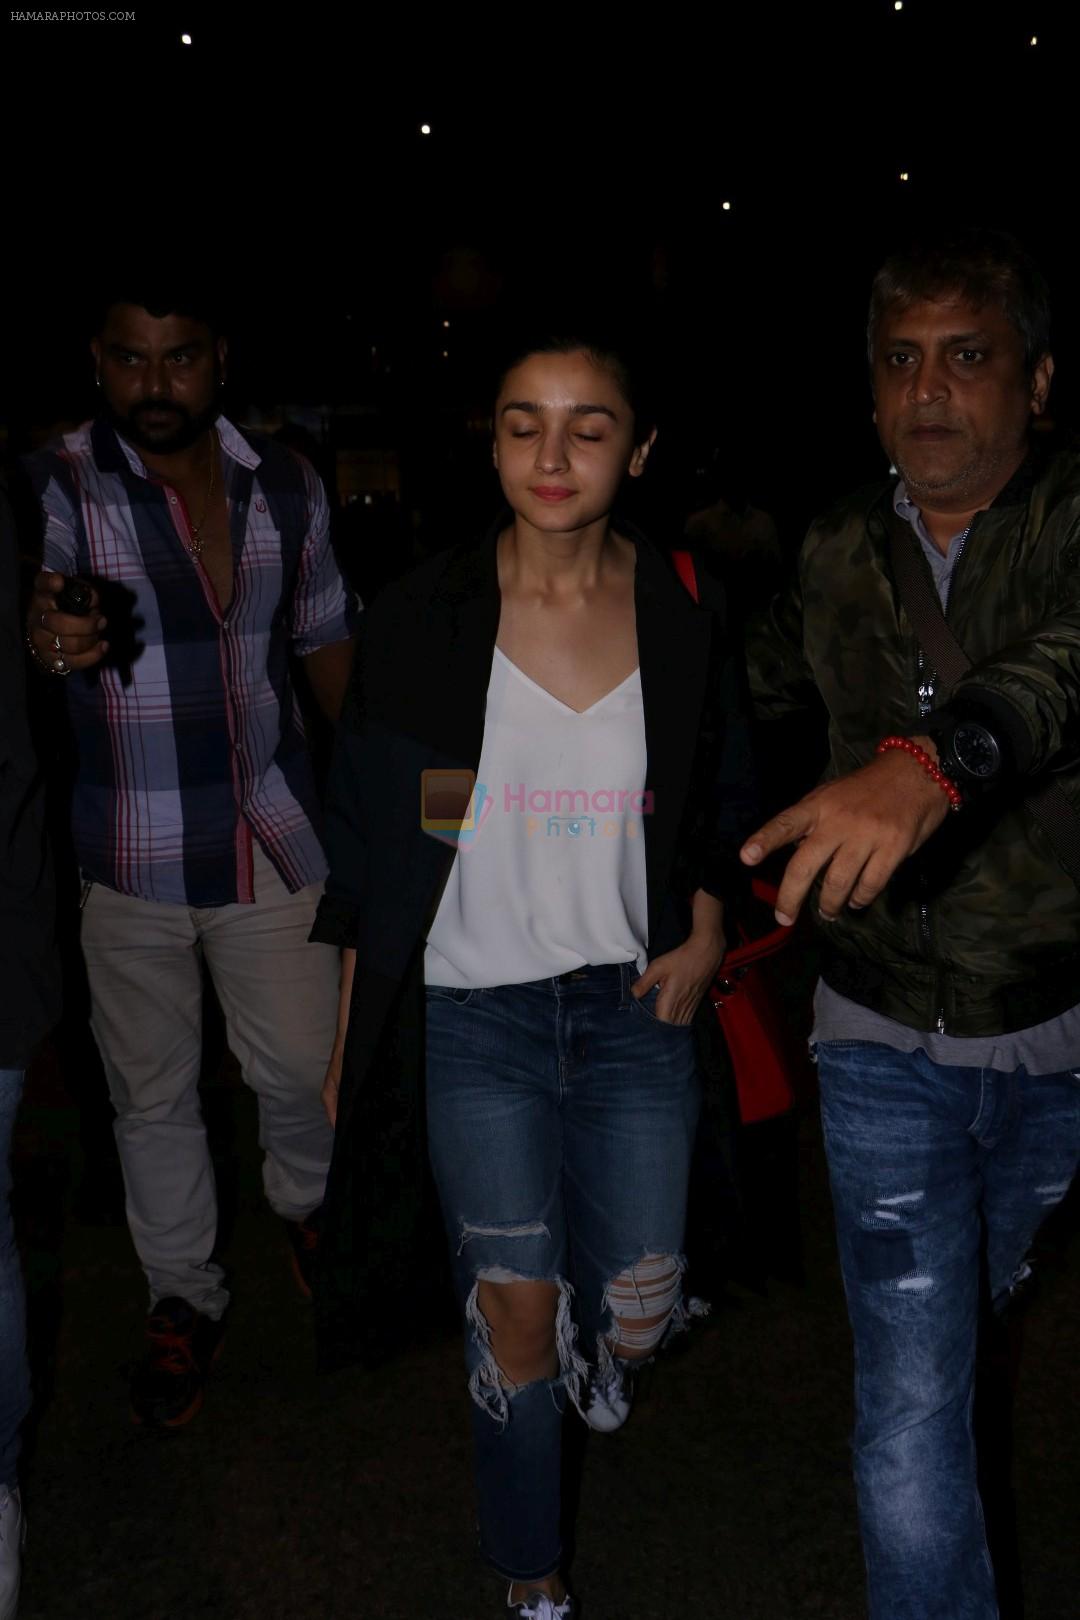 Alia Bhatt Spotted At Airport on 18th July 2017